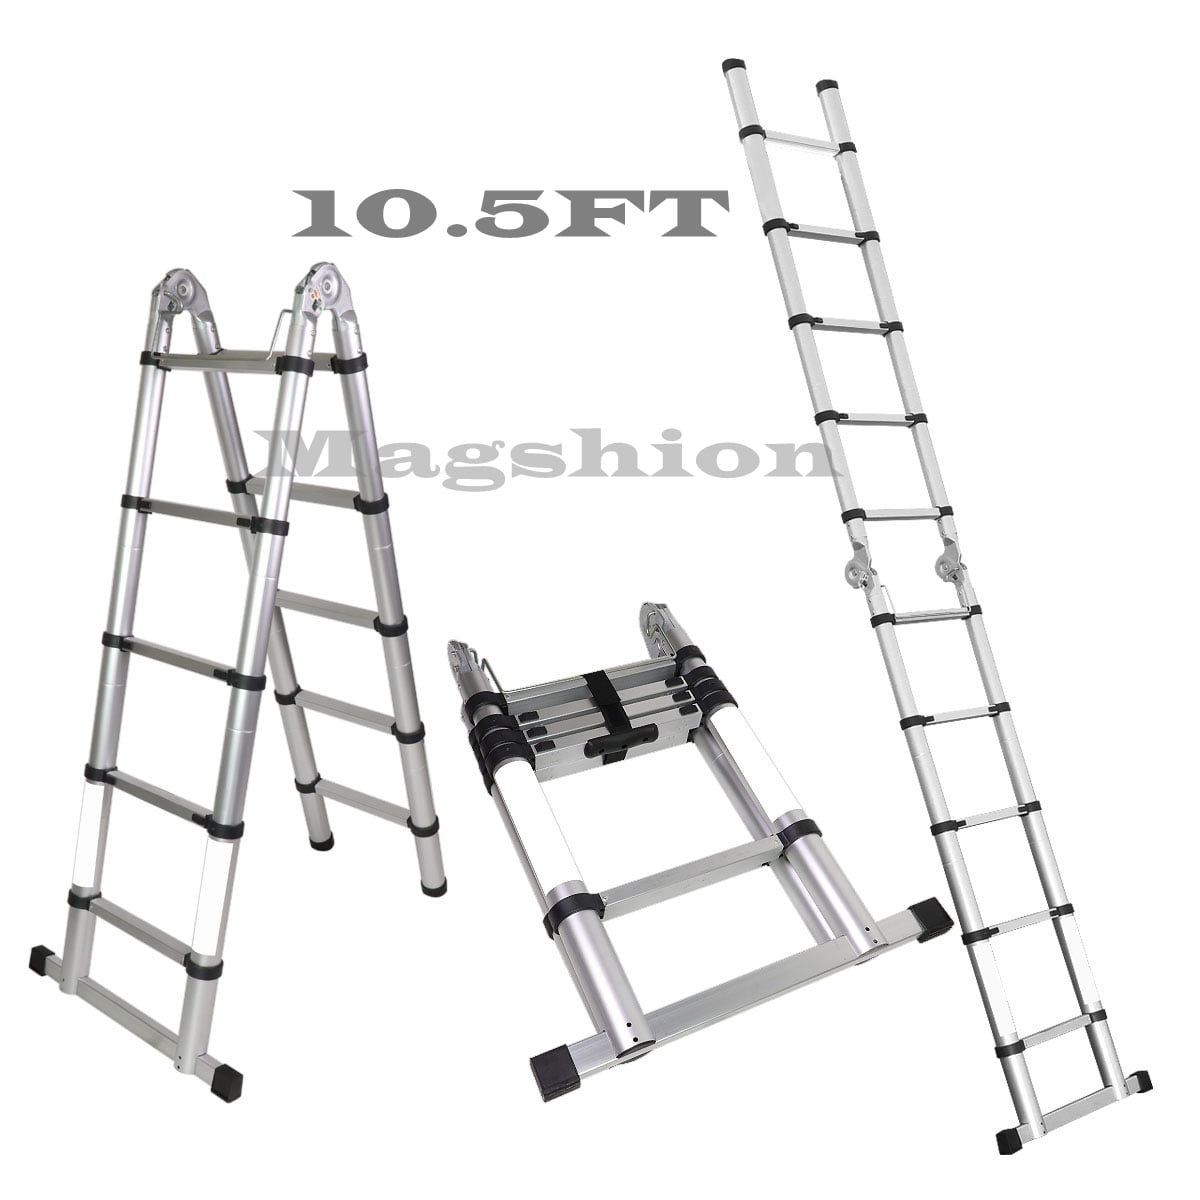 Magshion A-Frame Aluminum Ladder Telescopic Extension Tall Multi Purpose EN131 10.5 FT